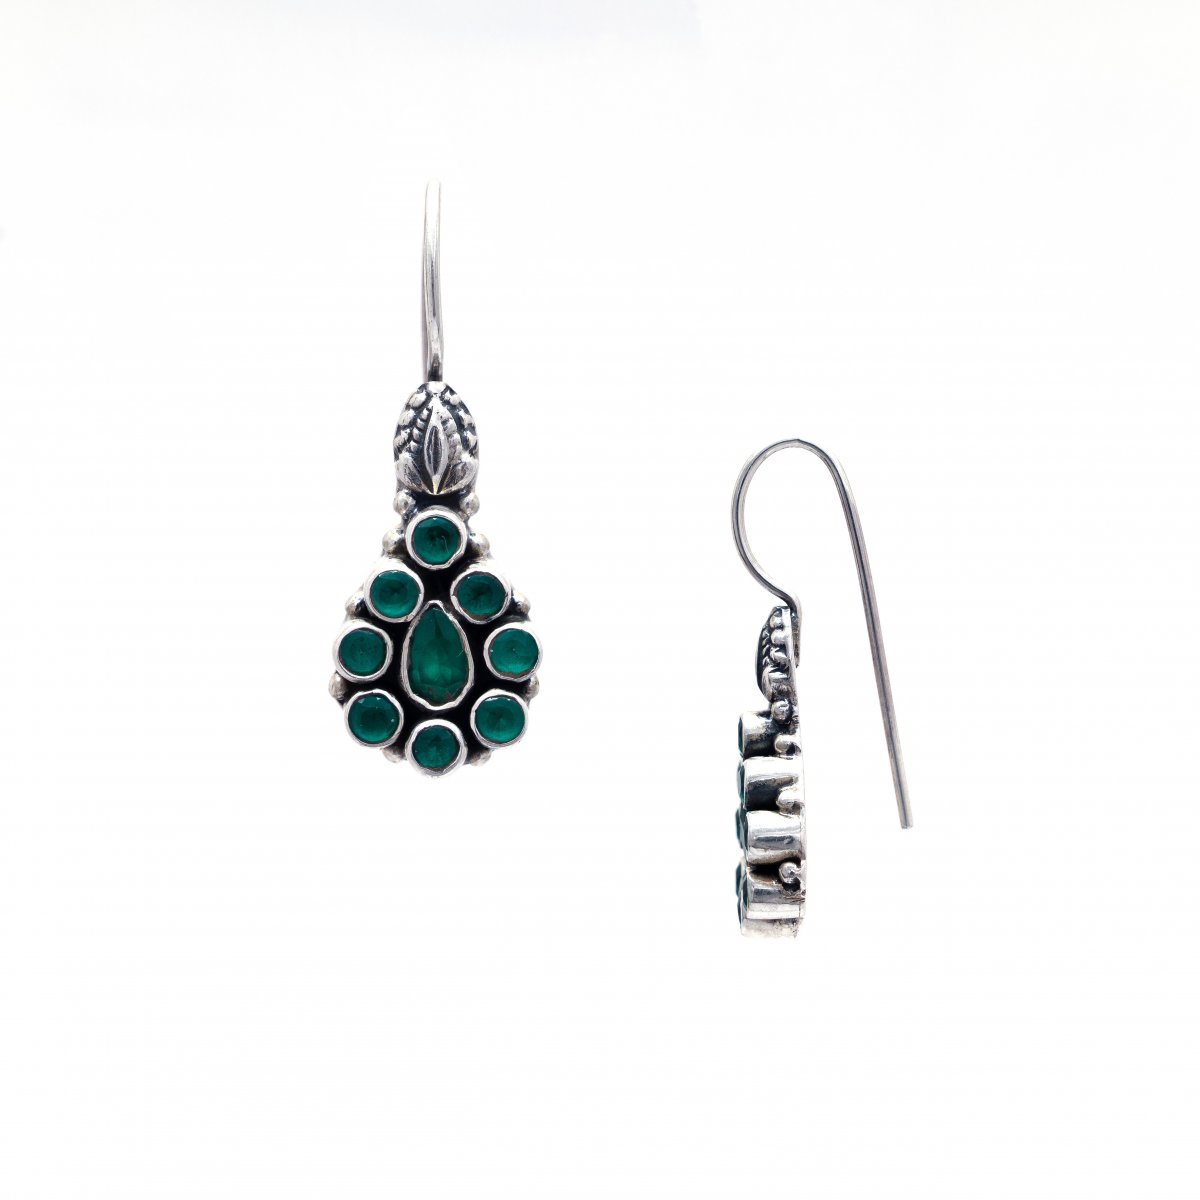 LIGHTWEIGHT SILVER OXIDIZED TRADITIONAL JHUMKA JHUMKI EARRINGS FOR WOMEN AND GIRLS 